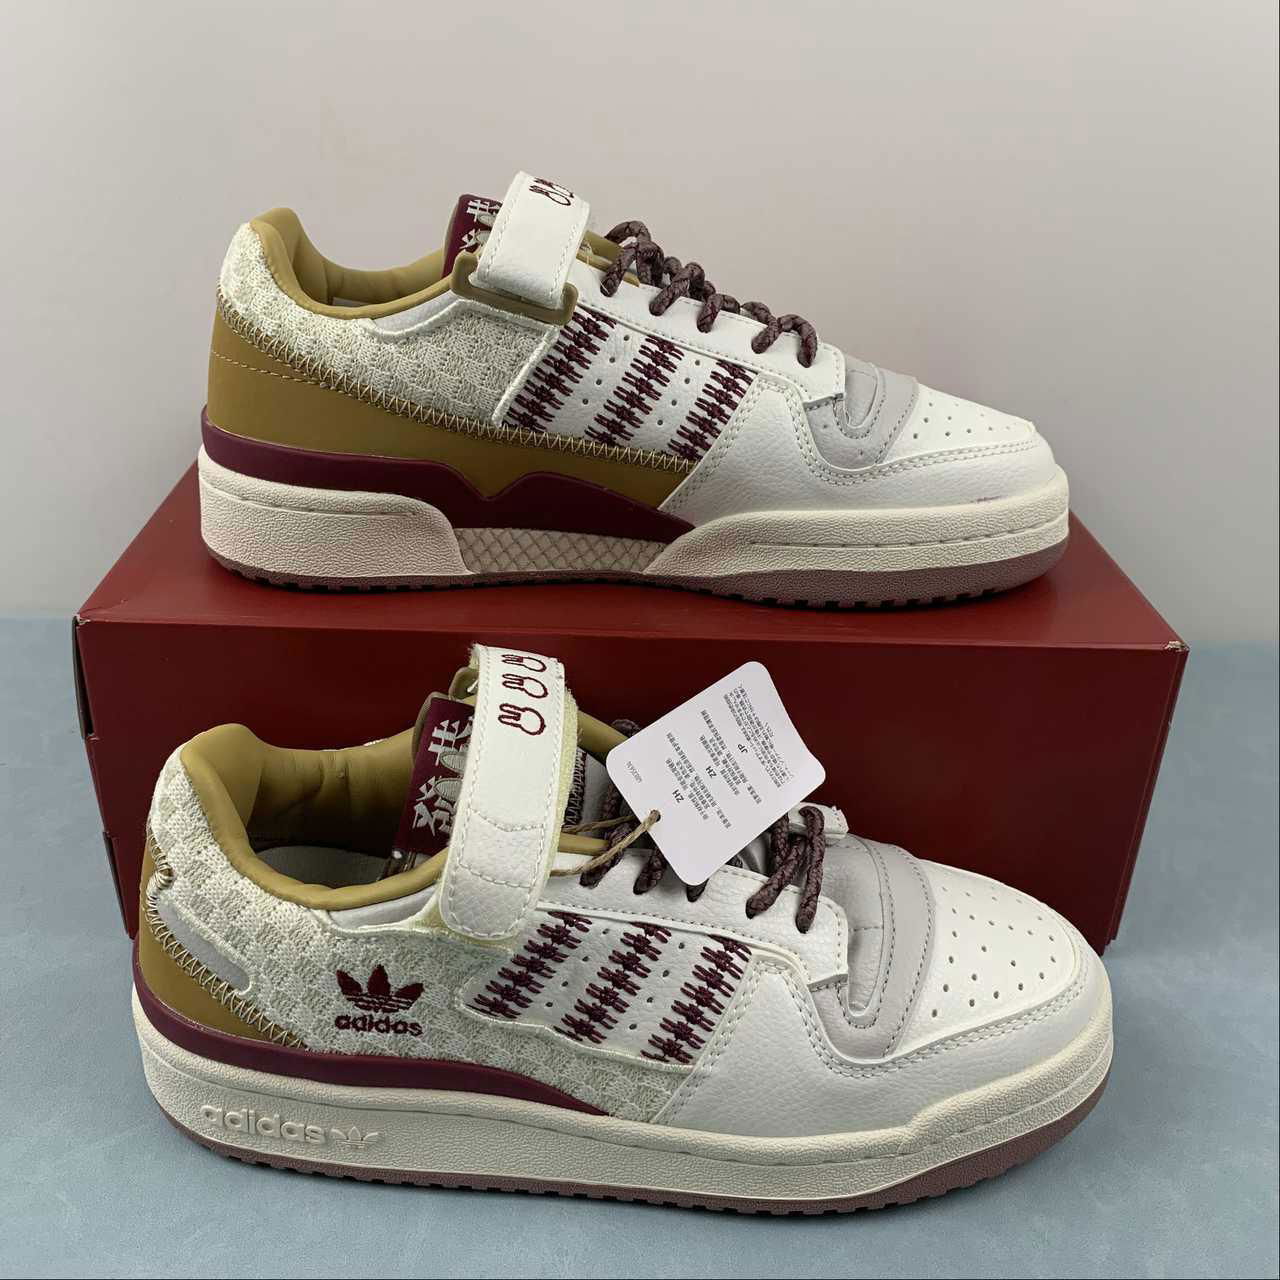        Forum 84 Campus casual sneakers IE1898